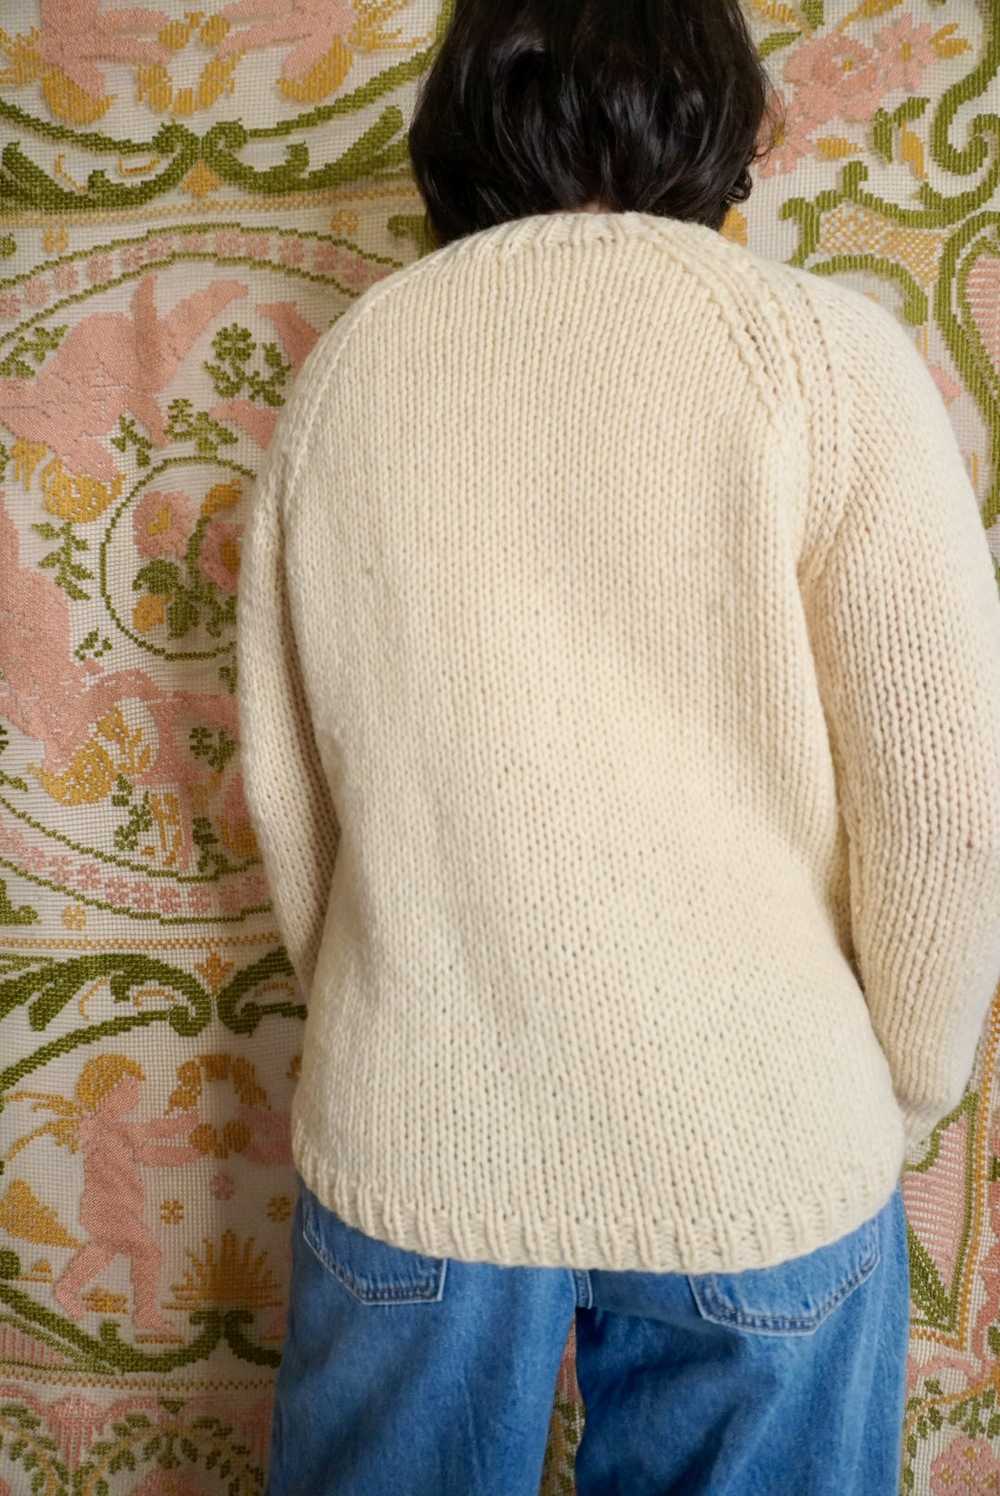 Classic Wool Pullover, S-M - image 3